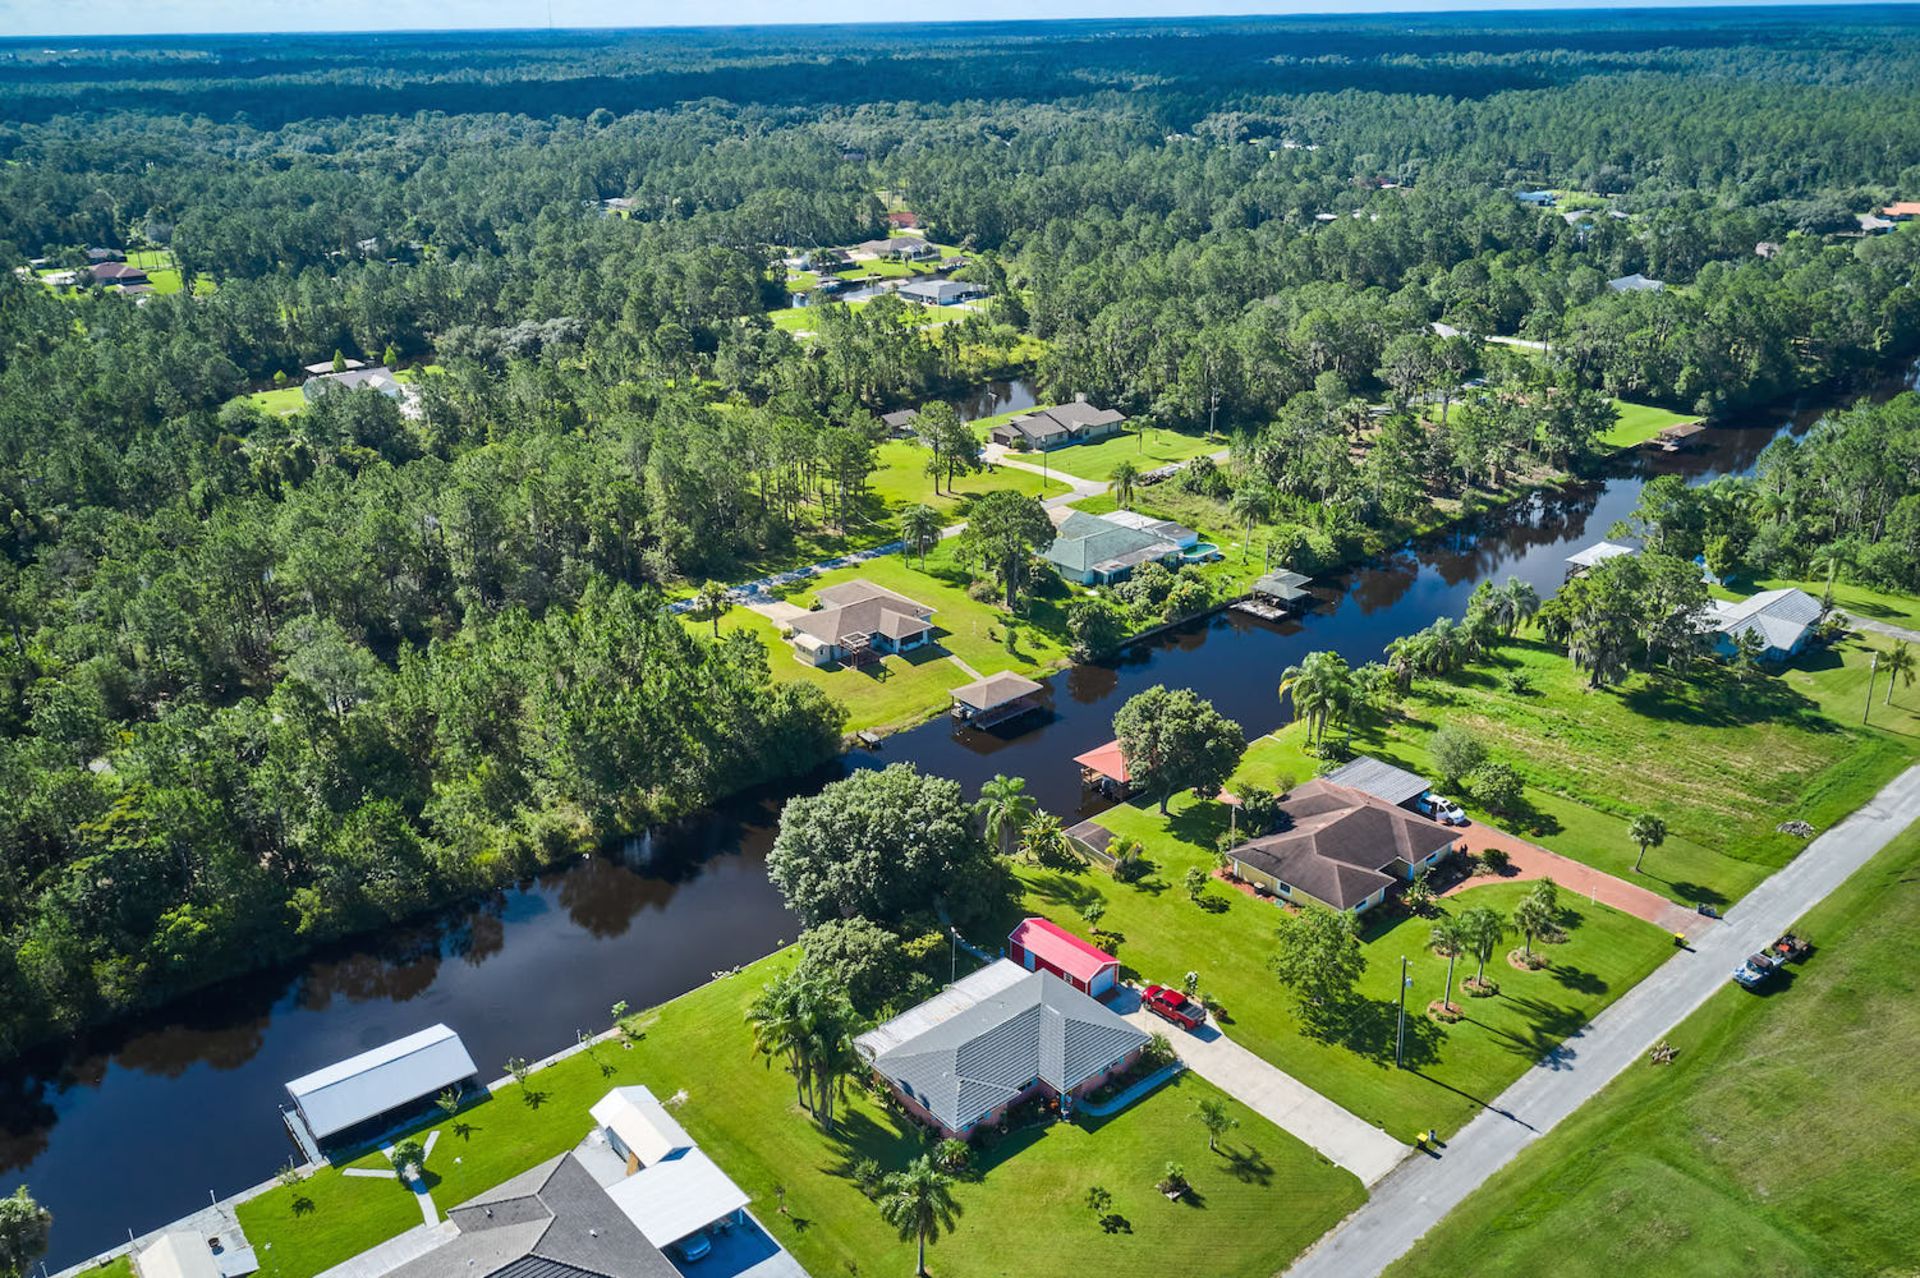 Build Your Central Florida Getaway on this Half-Acre Lot!